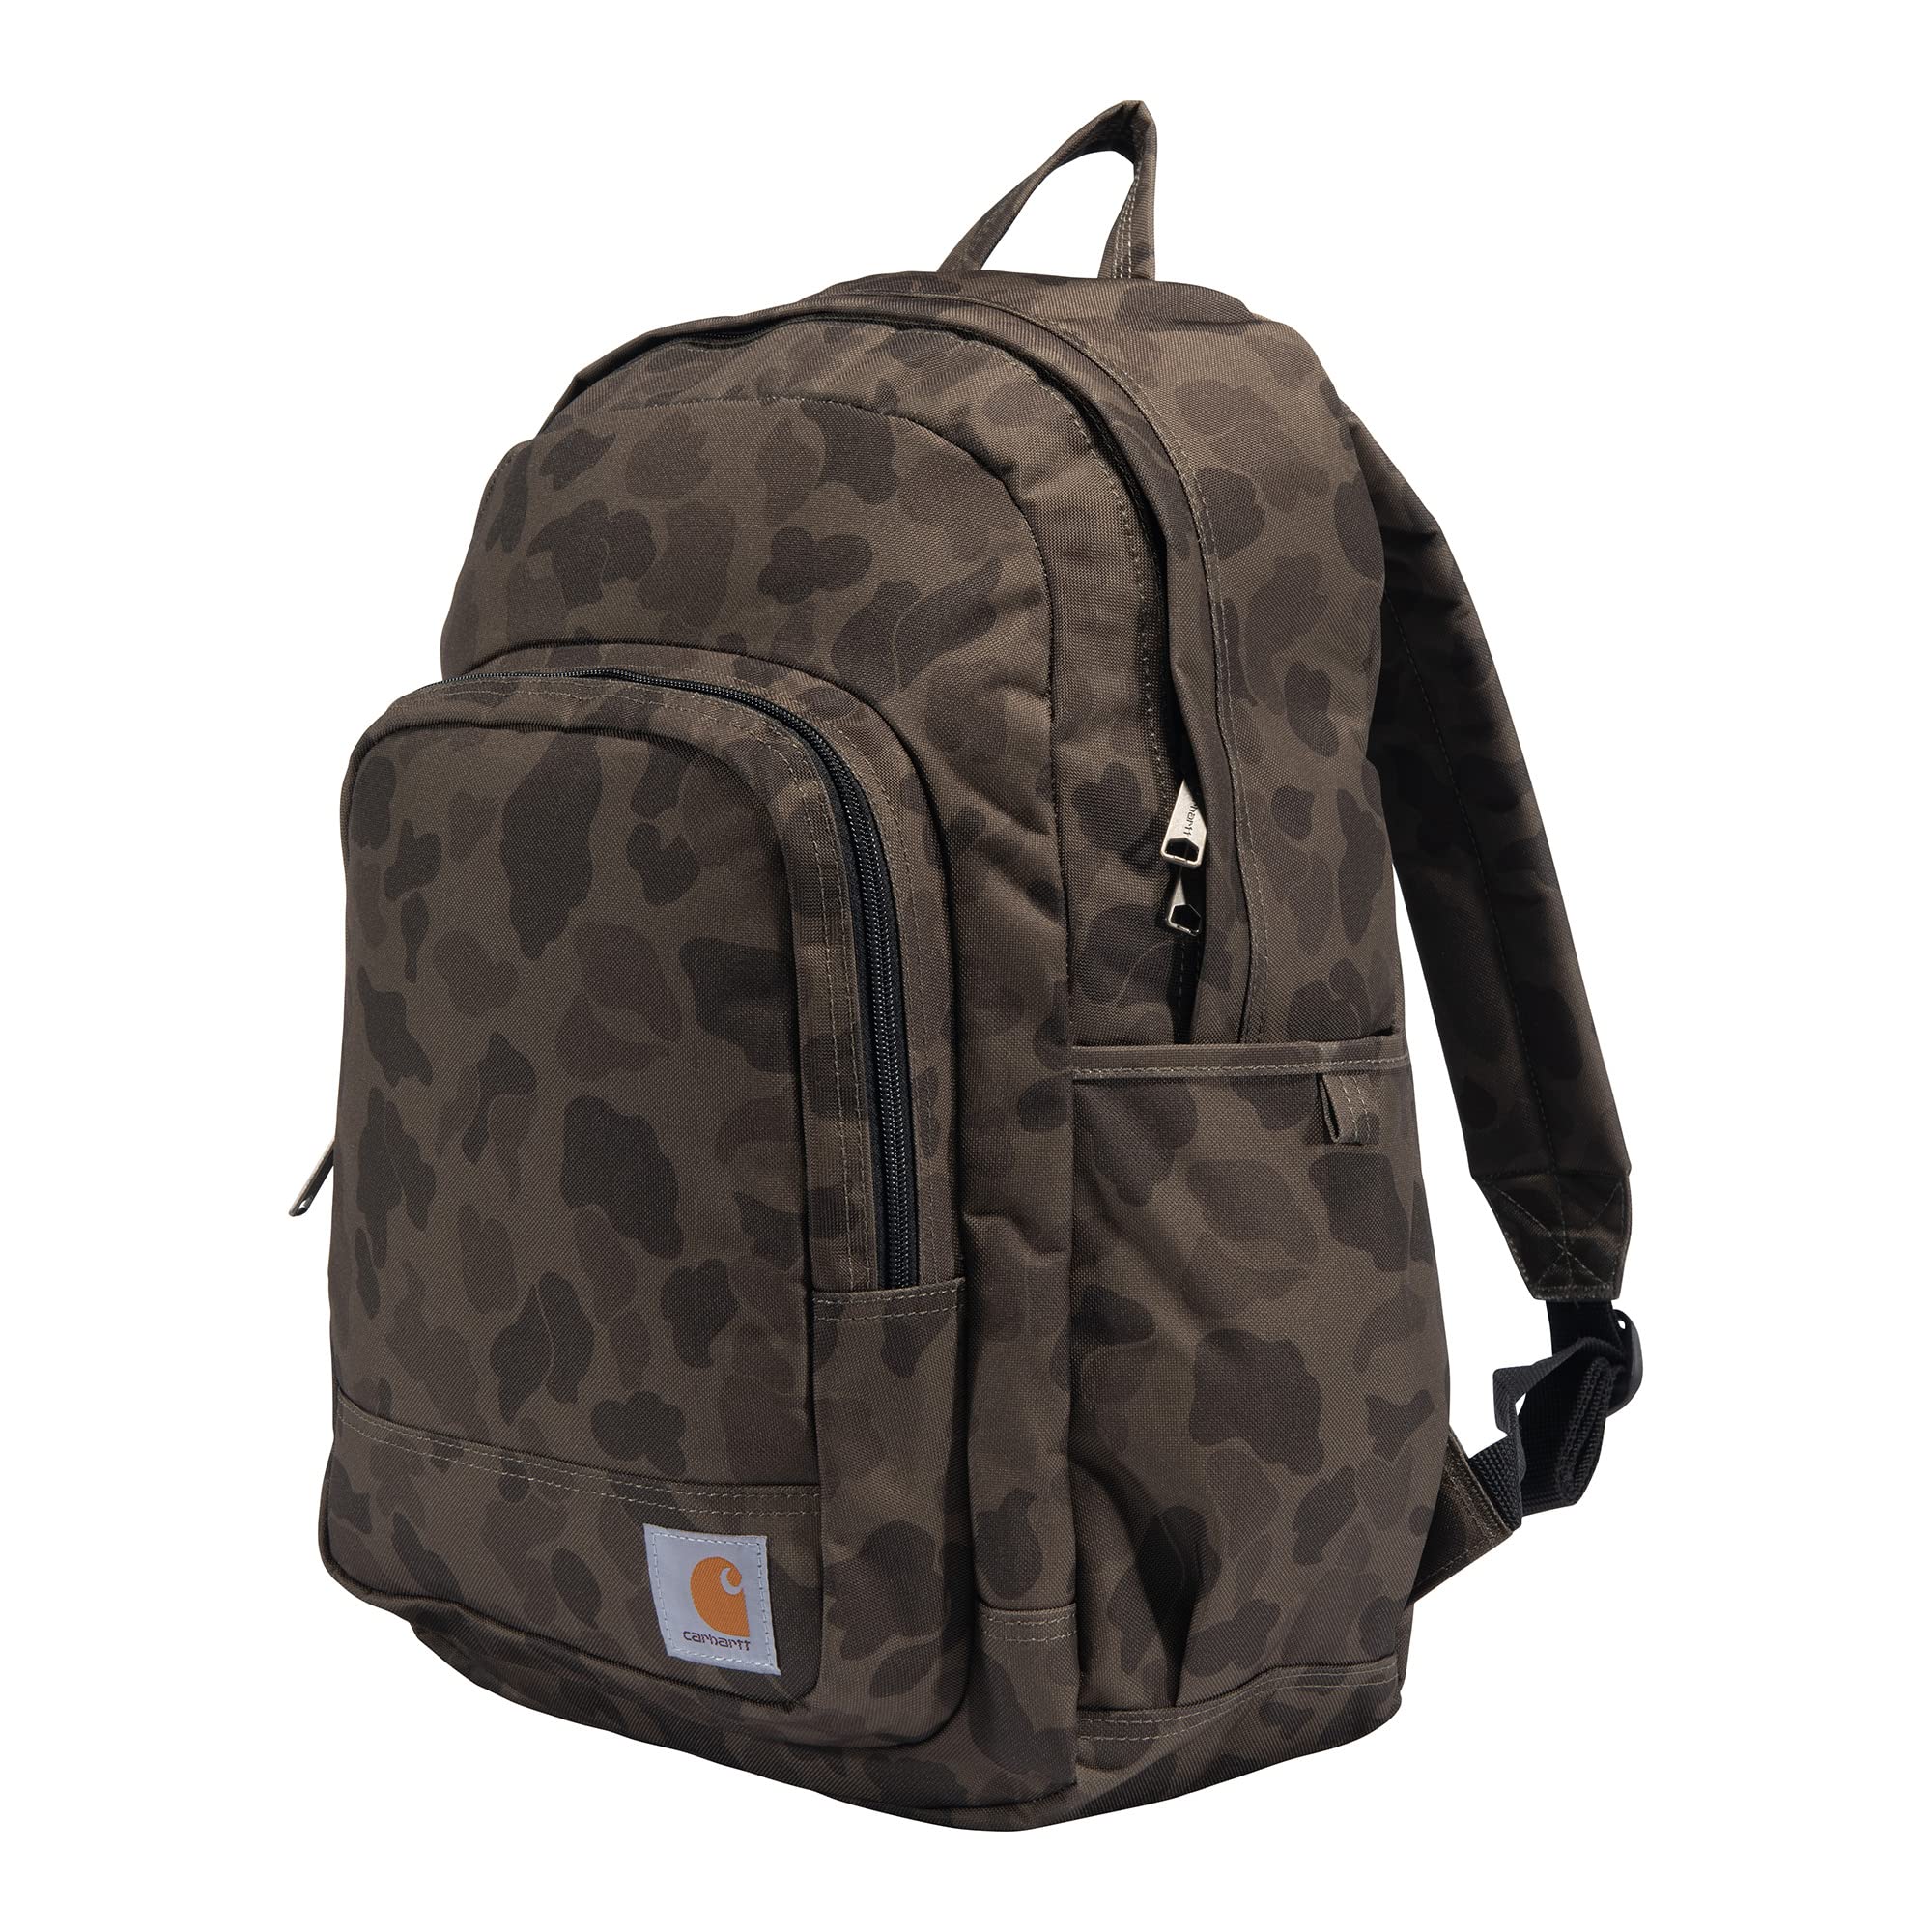 Carhartt 25L Classic Backpack, Durable Water-Resistant Pack with Laptop Sleeve, Duck Camo, One Size